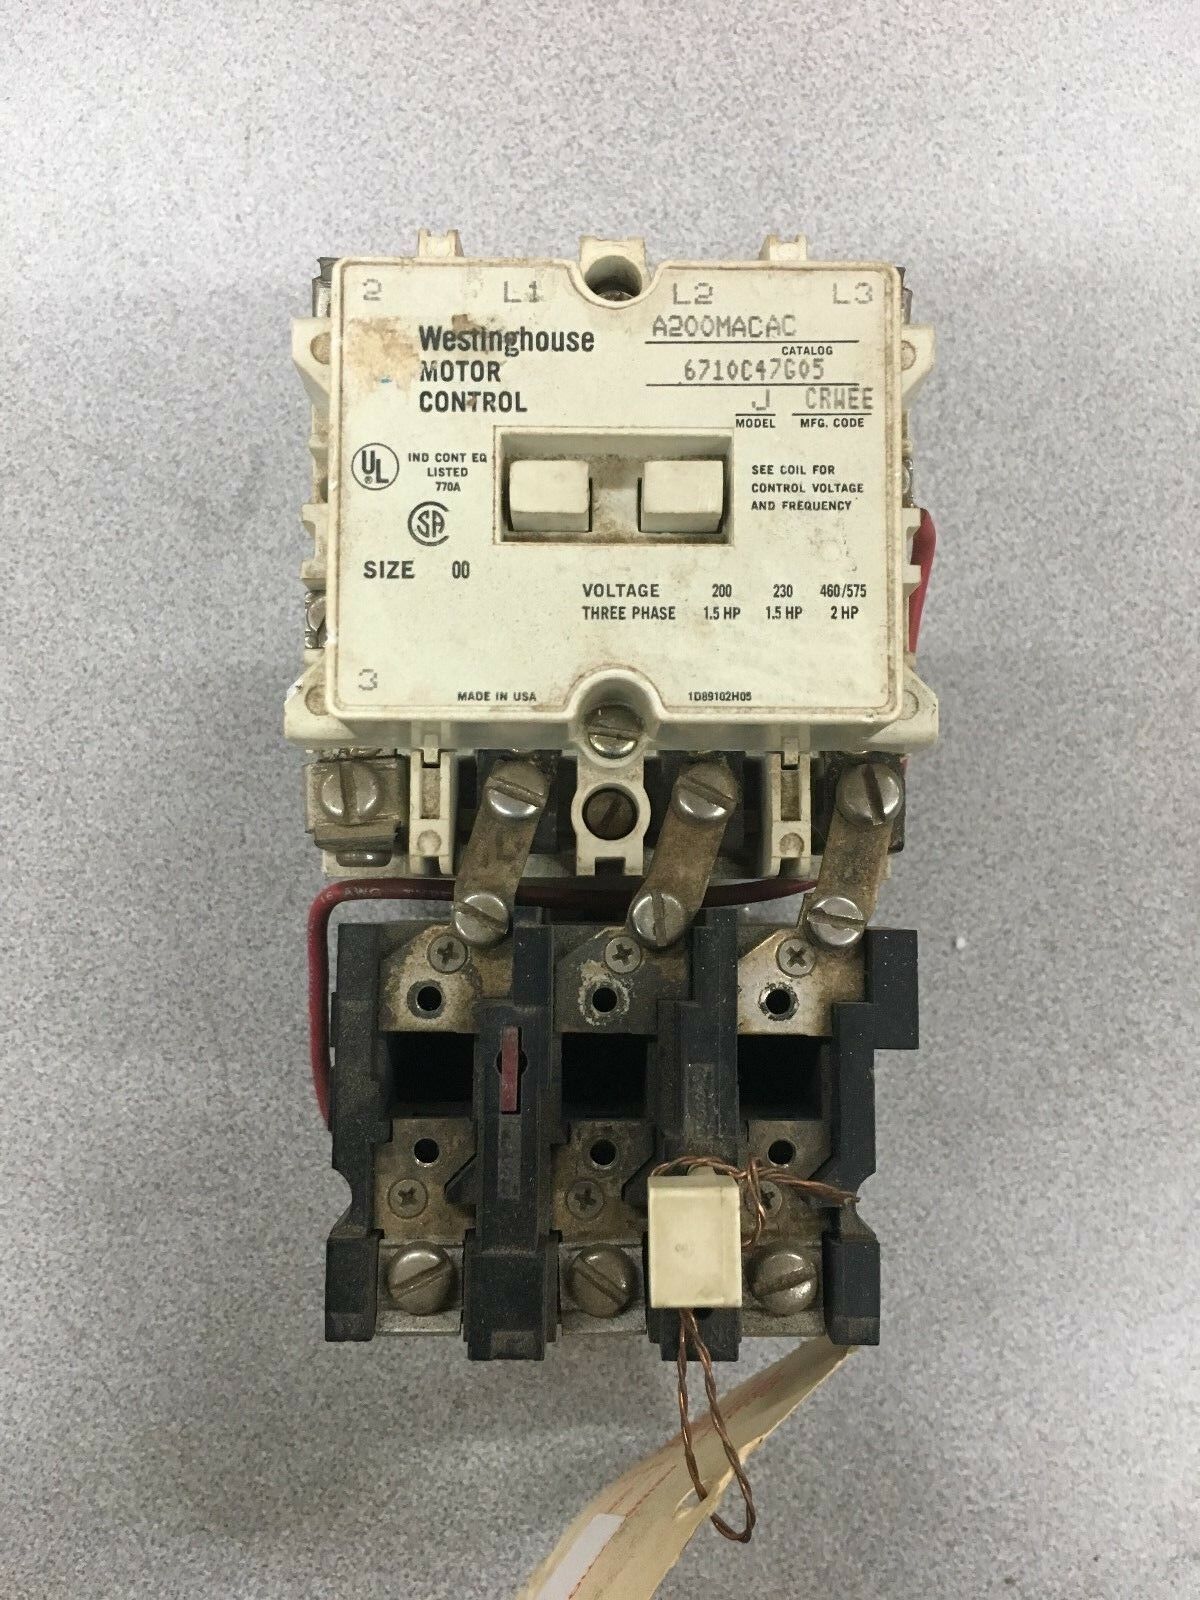 USED WESTIGNHOUSE SIZE 00 MOTOR STARTER 100/120V. COIL  A200MACAC